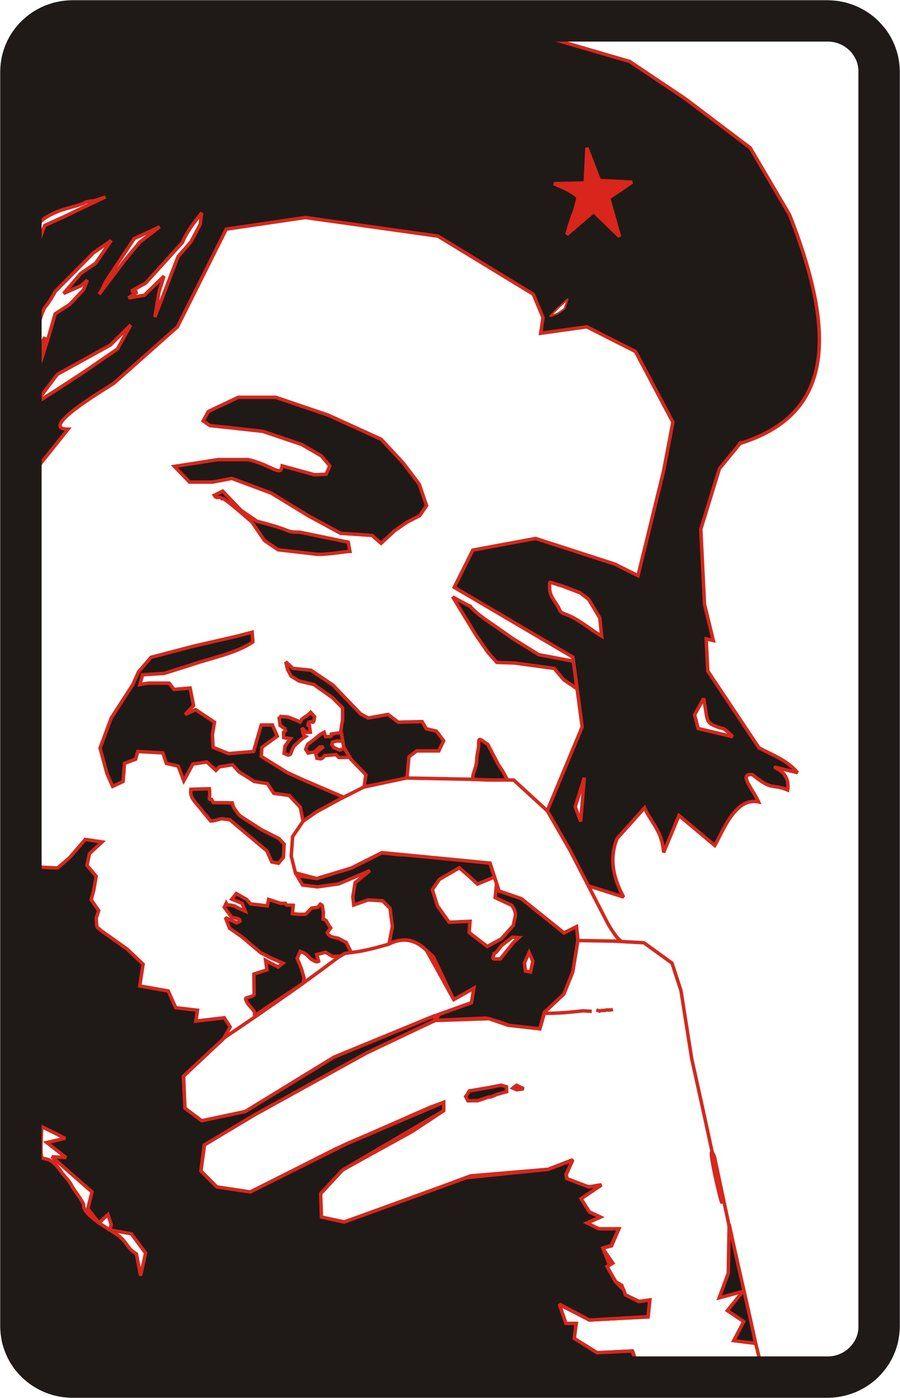 Che Guevara Wallpapers For Mobile - Wallpaper Cave